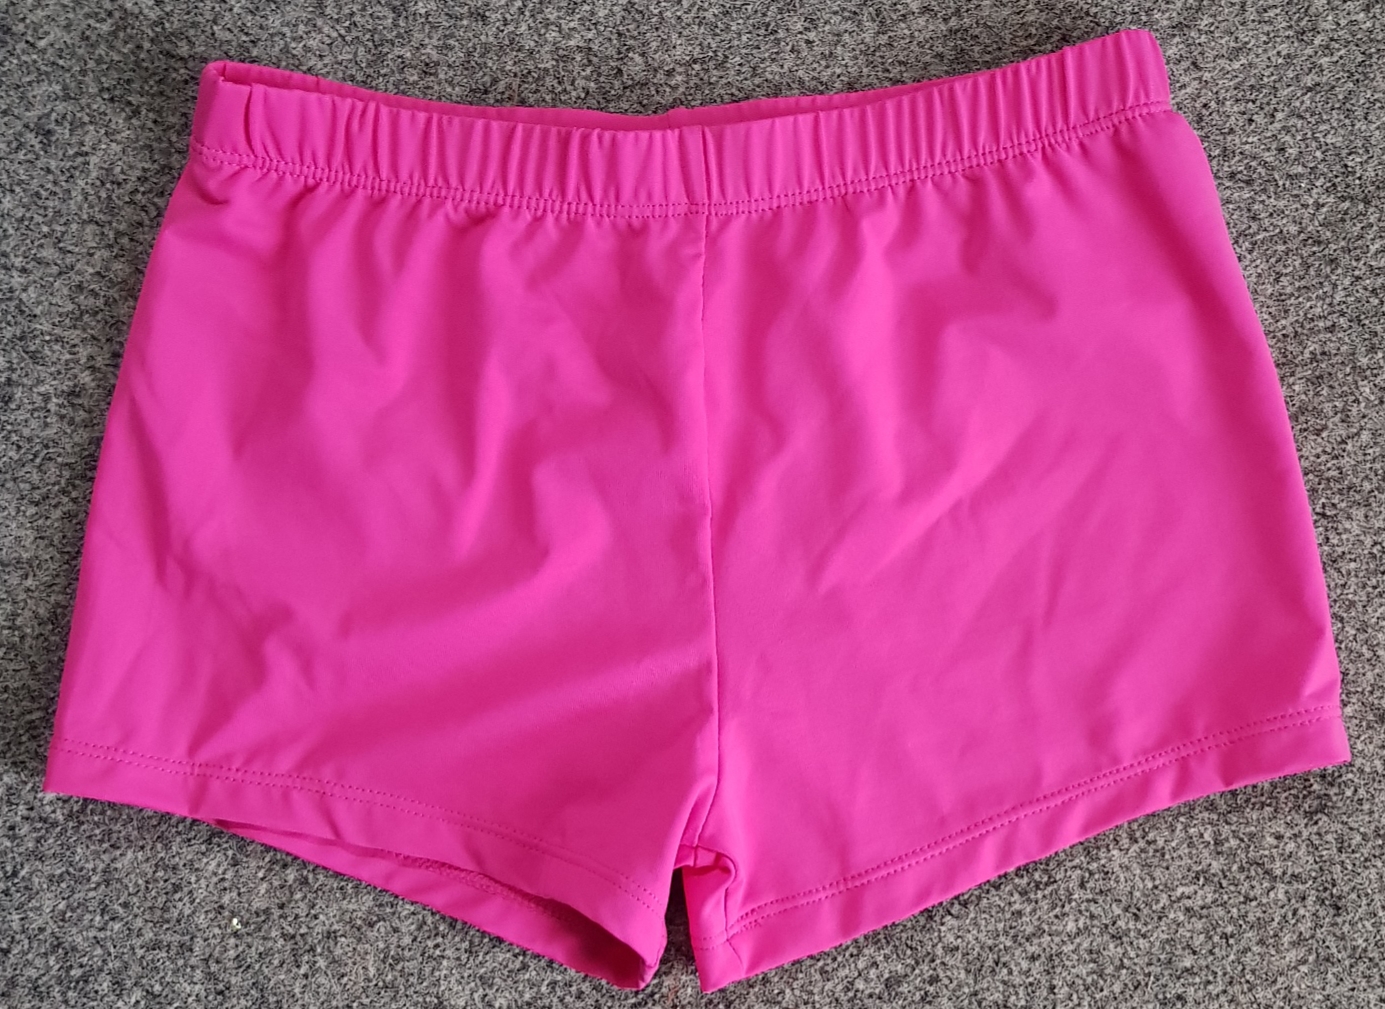 PINK SPANDEX SHORTS, SCUNGIES - AngelBows Dancewear Solutions